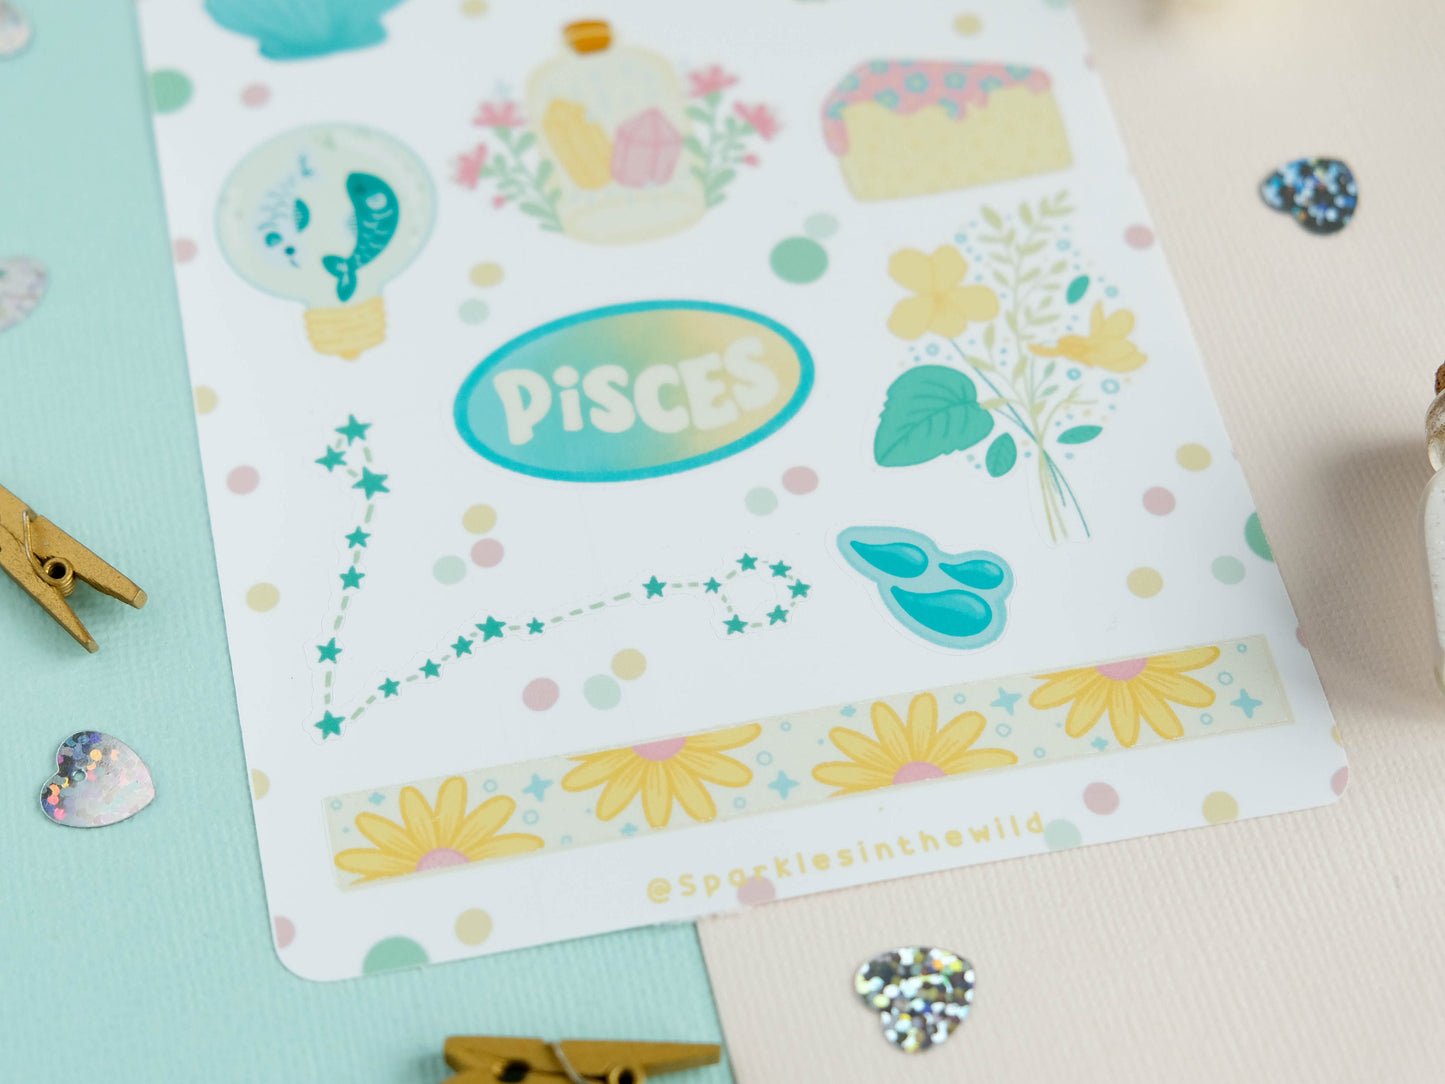 Sticker sheet Pisces astrology enthusiasts - Add a personal touch to your favorite items with this unique collection of Pisces stickers.